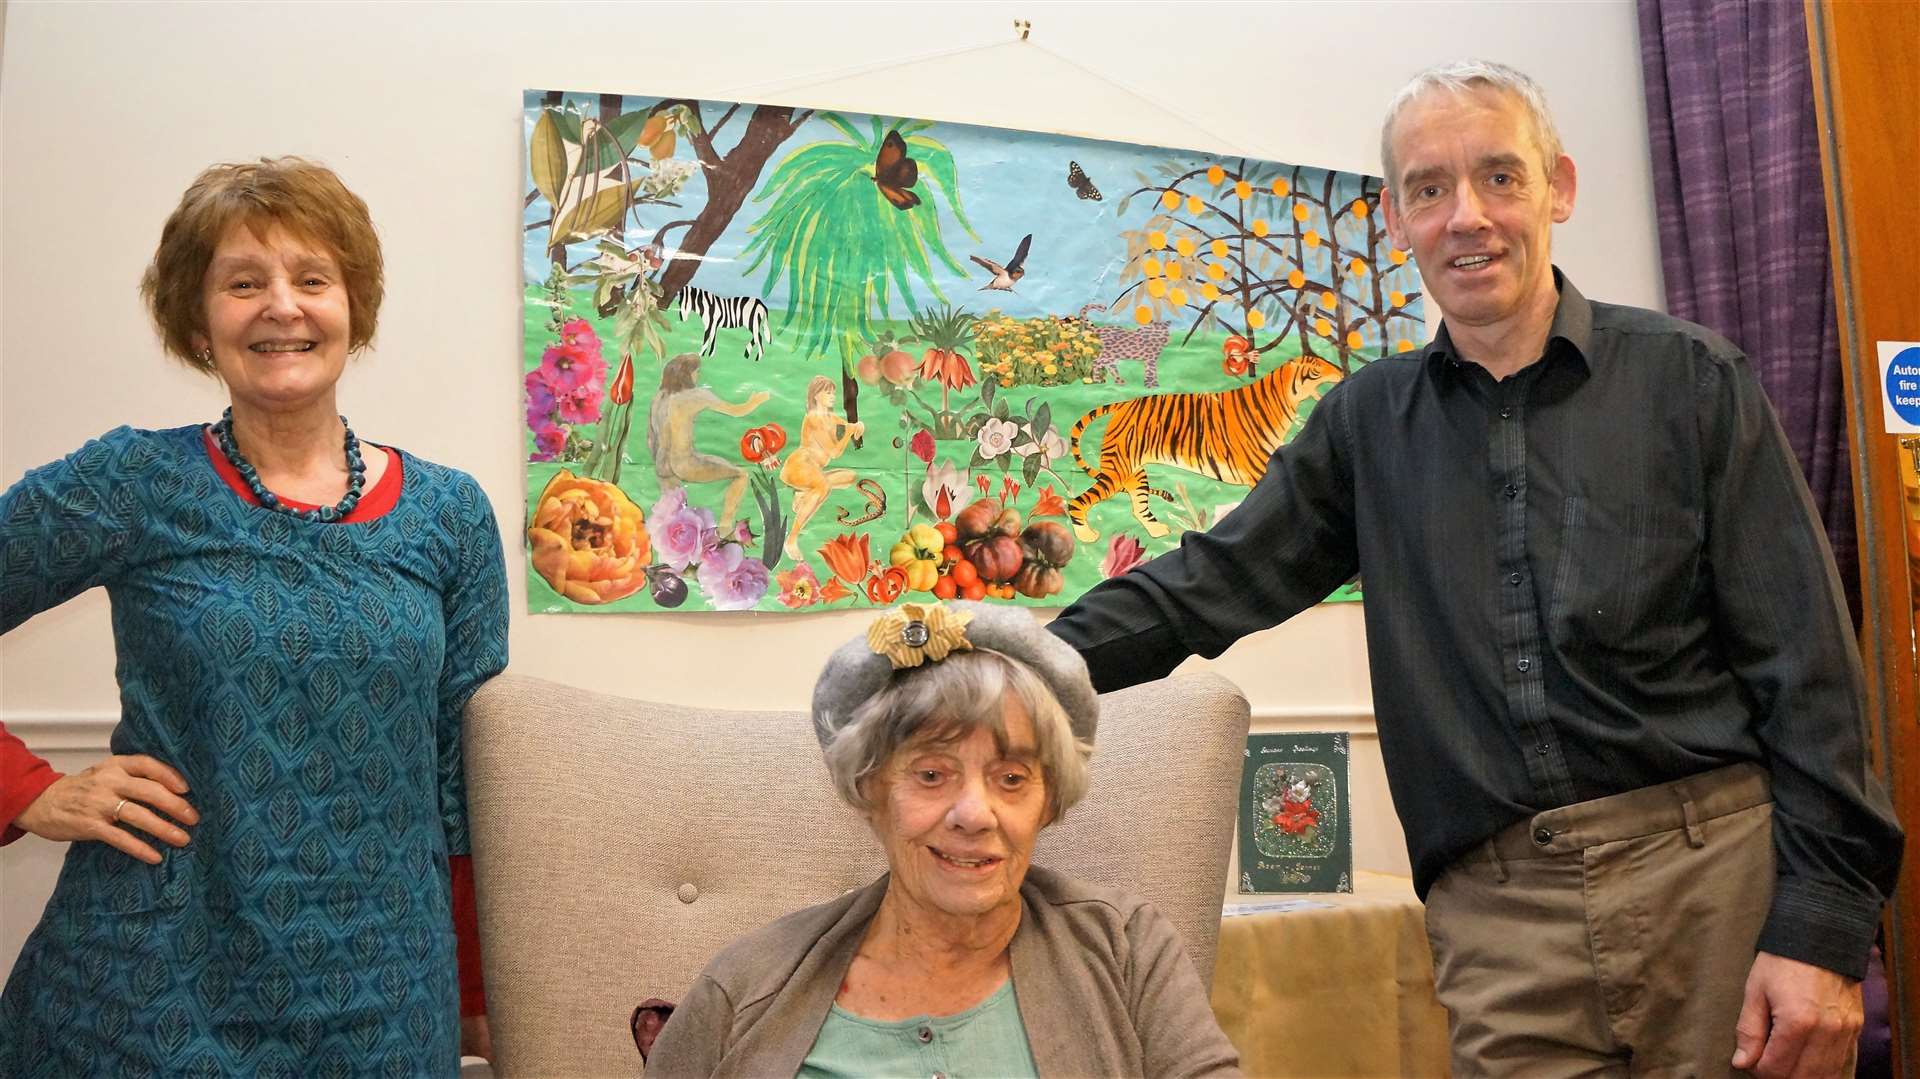 Joan Powell's befriender Dorothy Woodall, left, alongside Joan and her son Gavin Powell who lives in Halkirk. Behind them is a collage by Joan called Adam and Eve which is one of her favourite pieces. Pictures: DGS